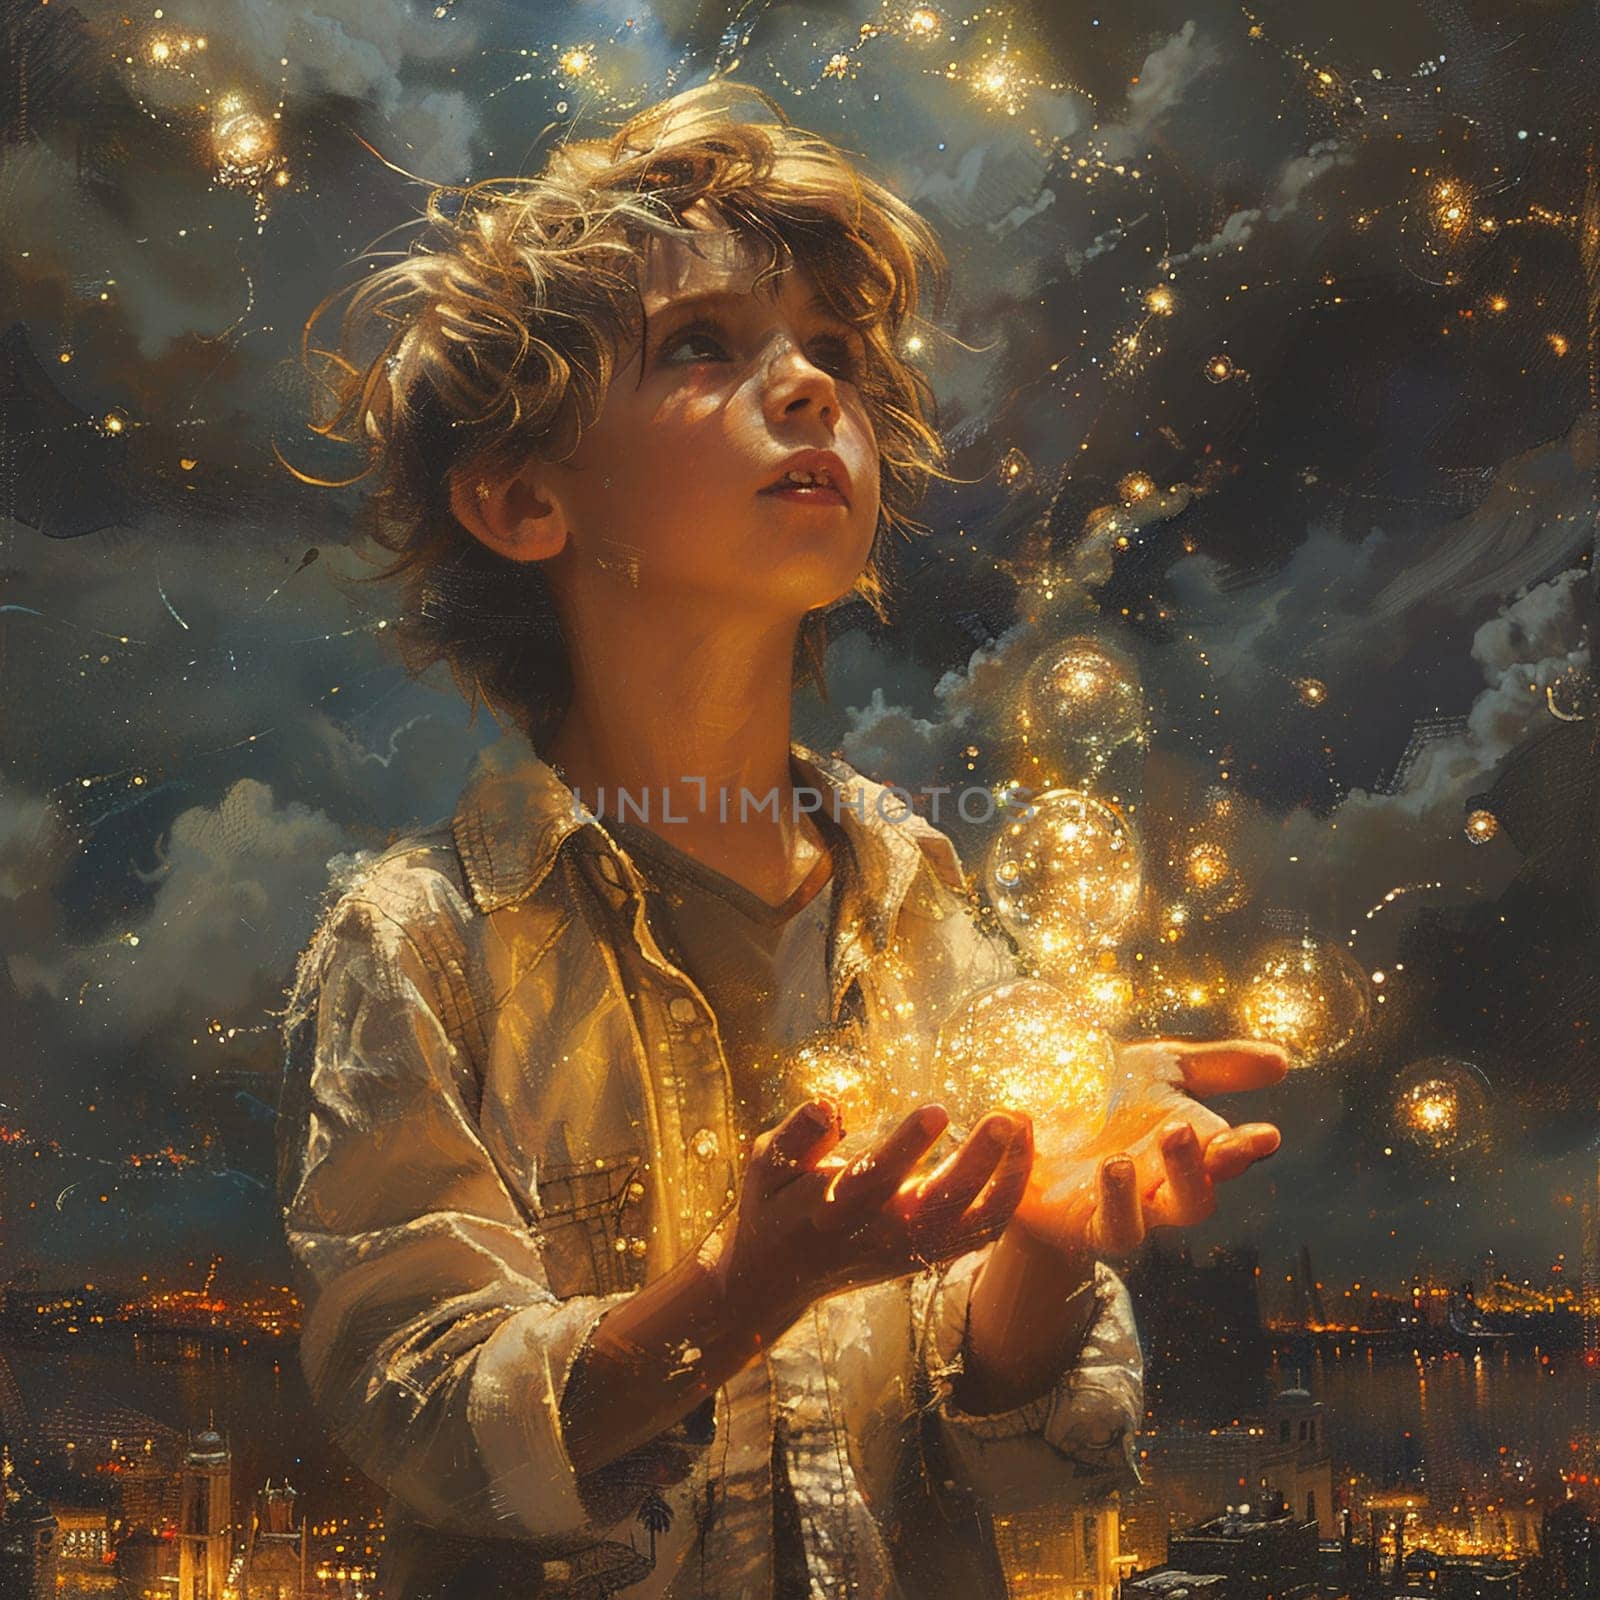 Young alchemist decoding the elixir of the skies, the alchemy of clouds within their grasp.